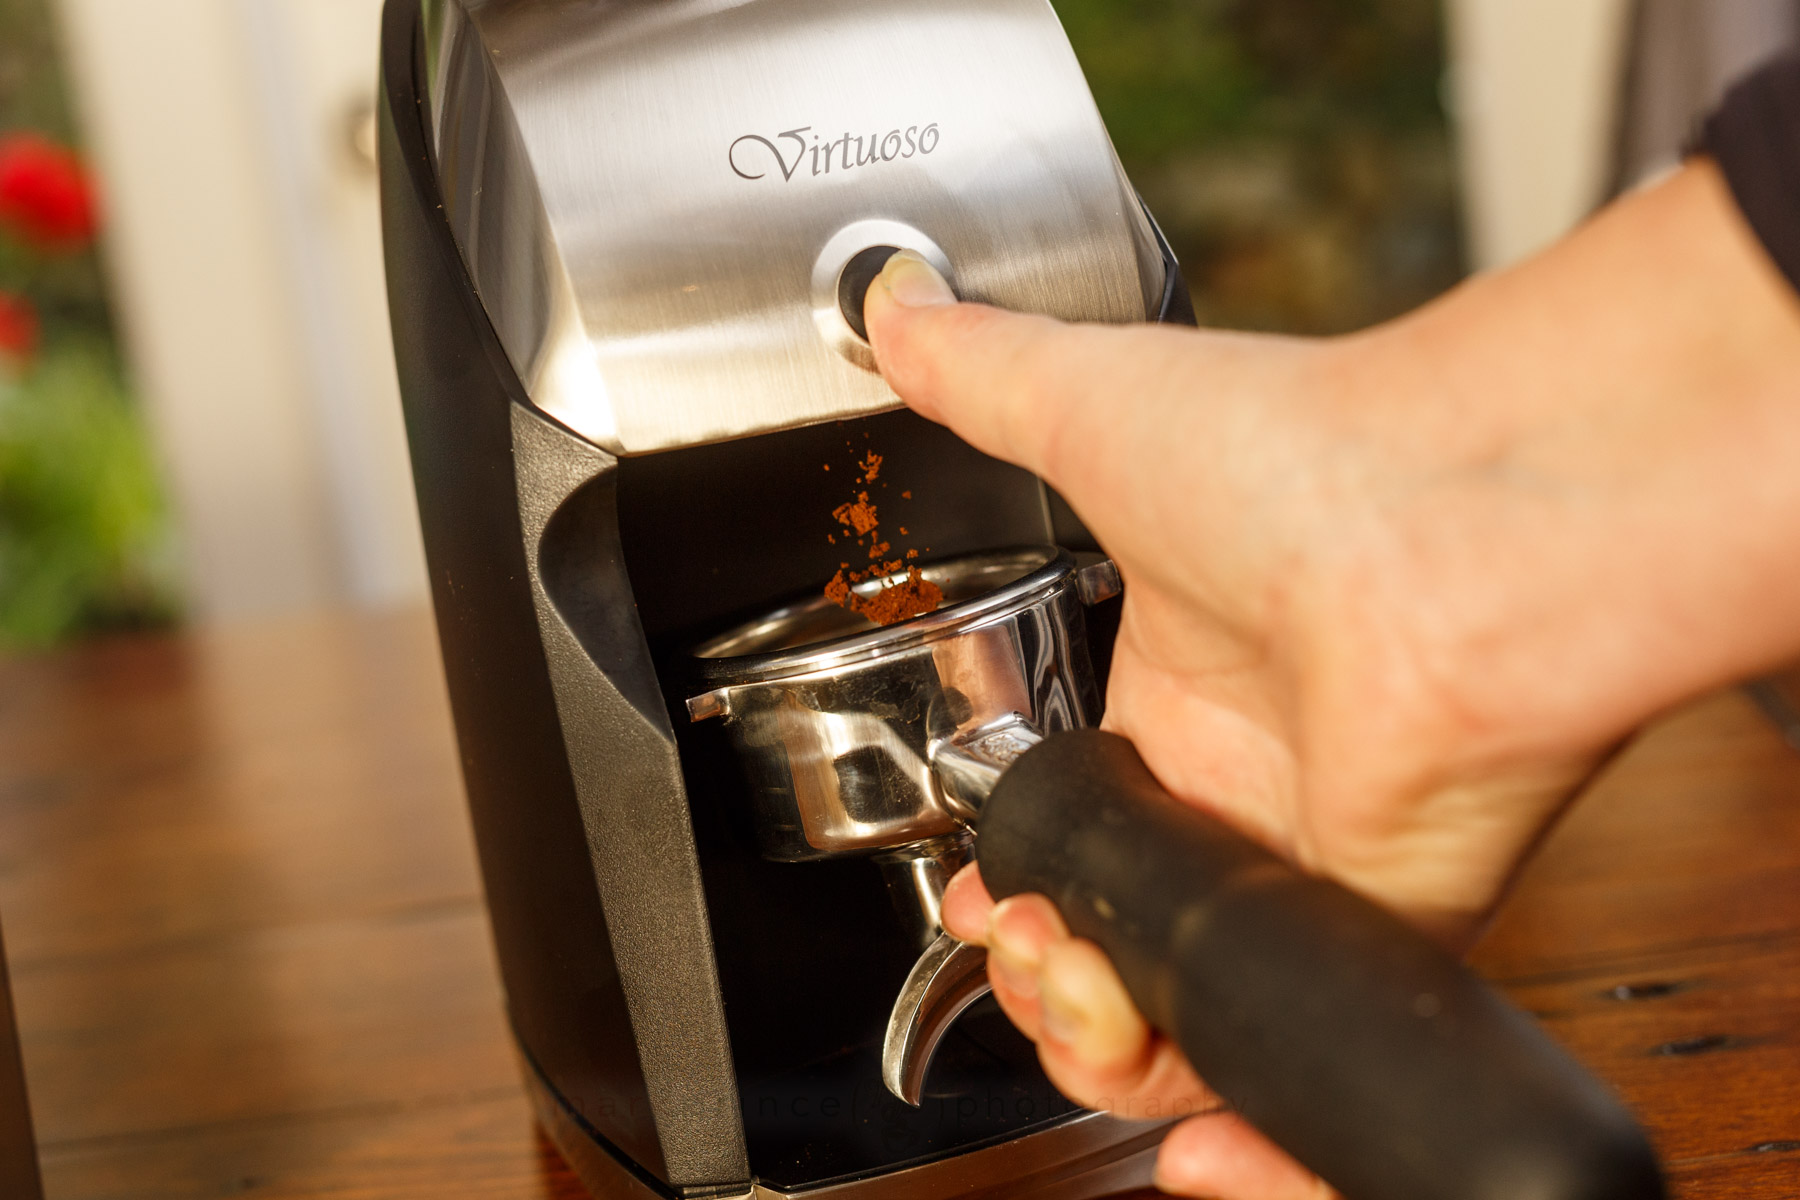 Grab the Famiworths Coffee maker for as low as $20 today and enjoy